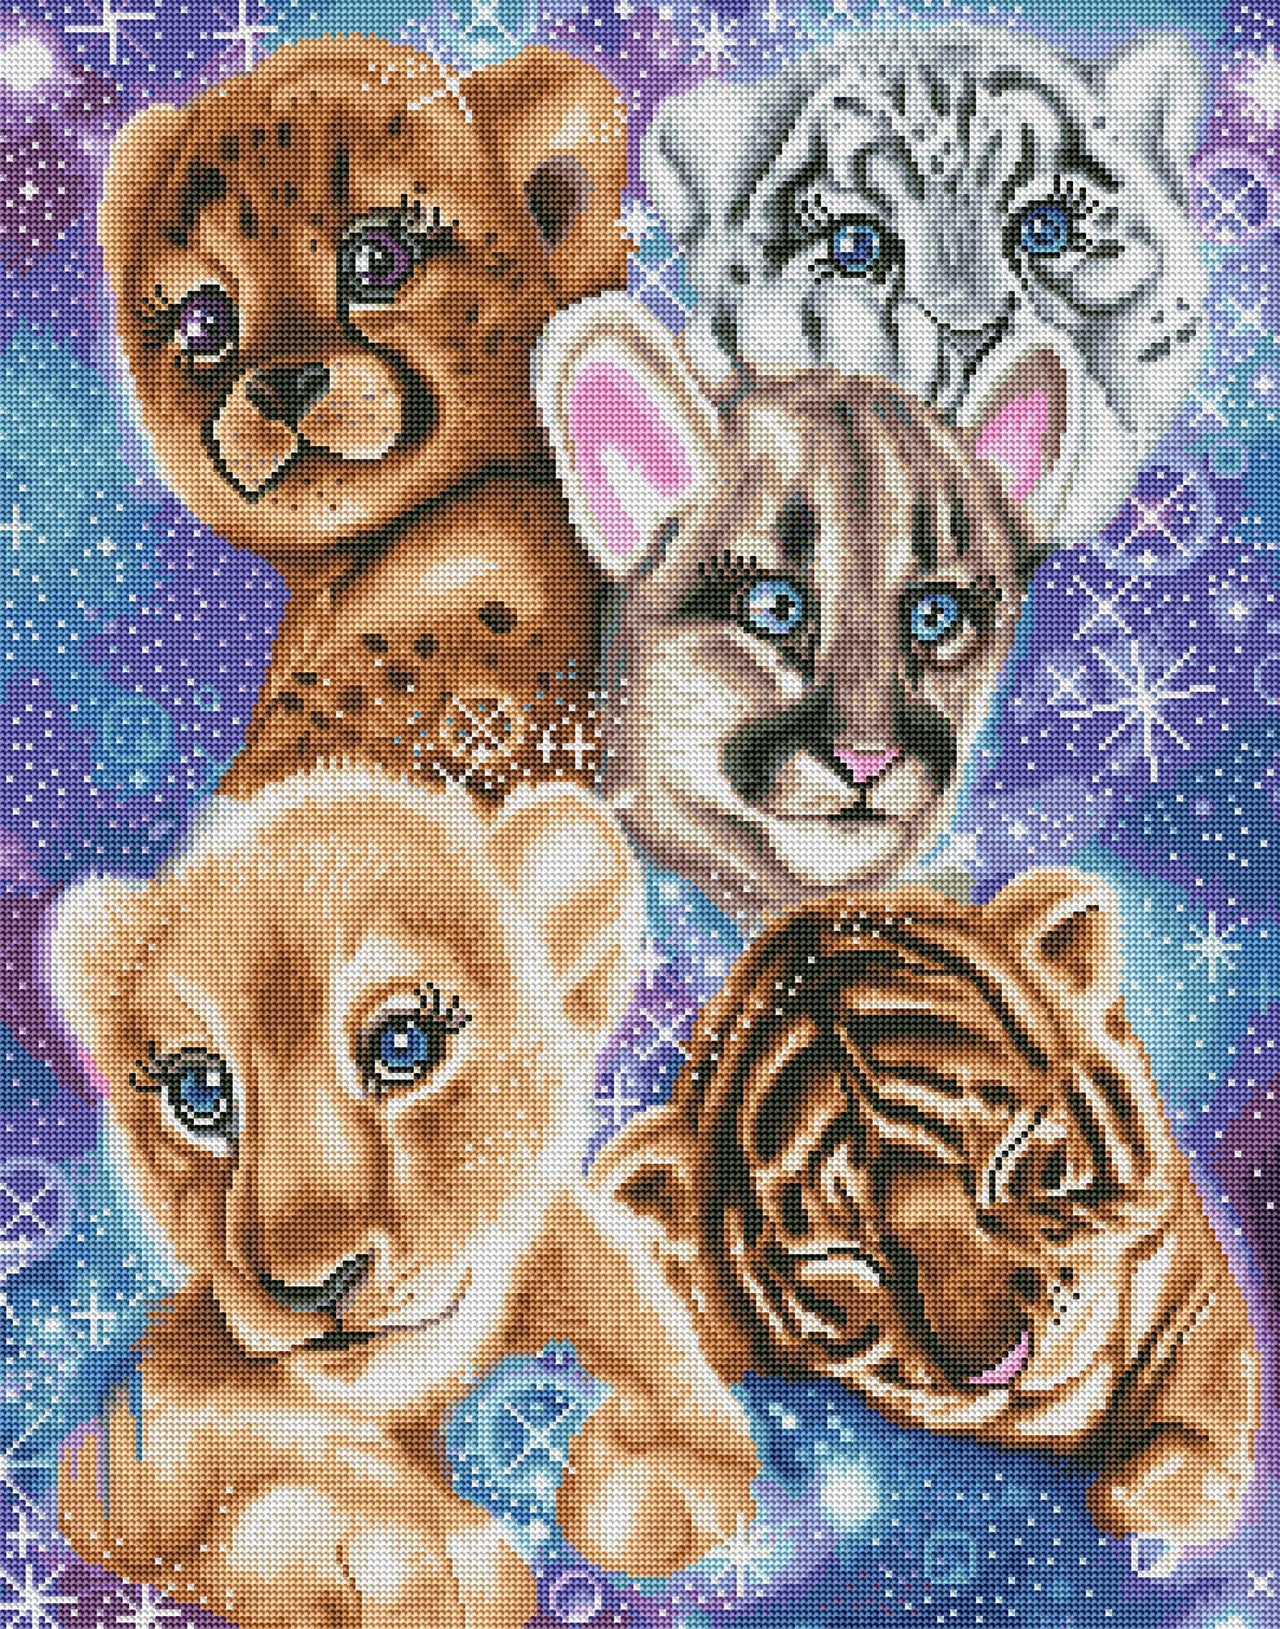 Diamond Painting Galaxy Wild Kitten Cubs 22" x 28″ (56cm x 71cm) / Round with 44 Colors including 1 AB / 49,897